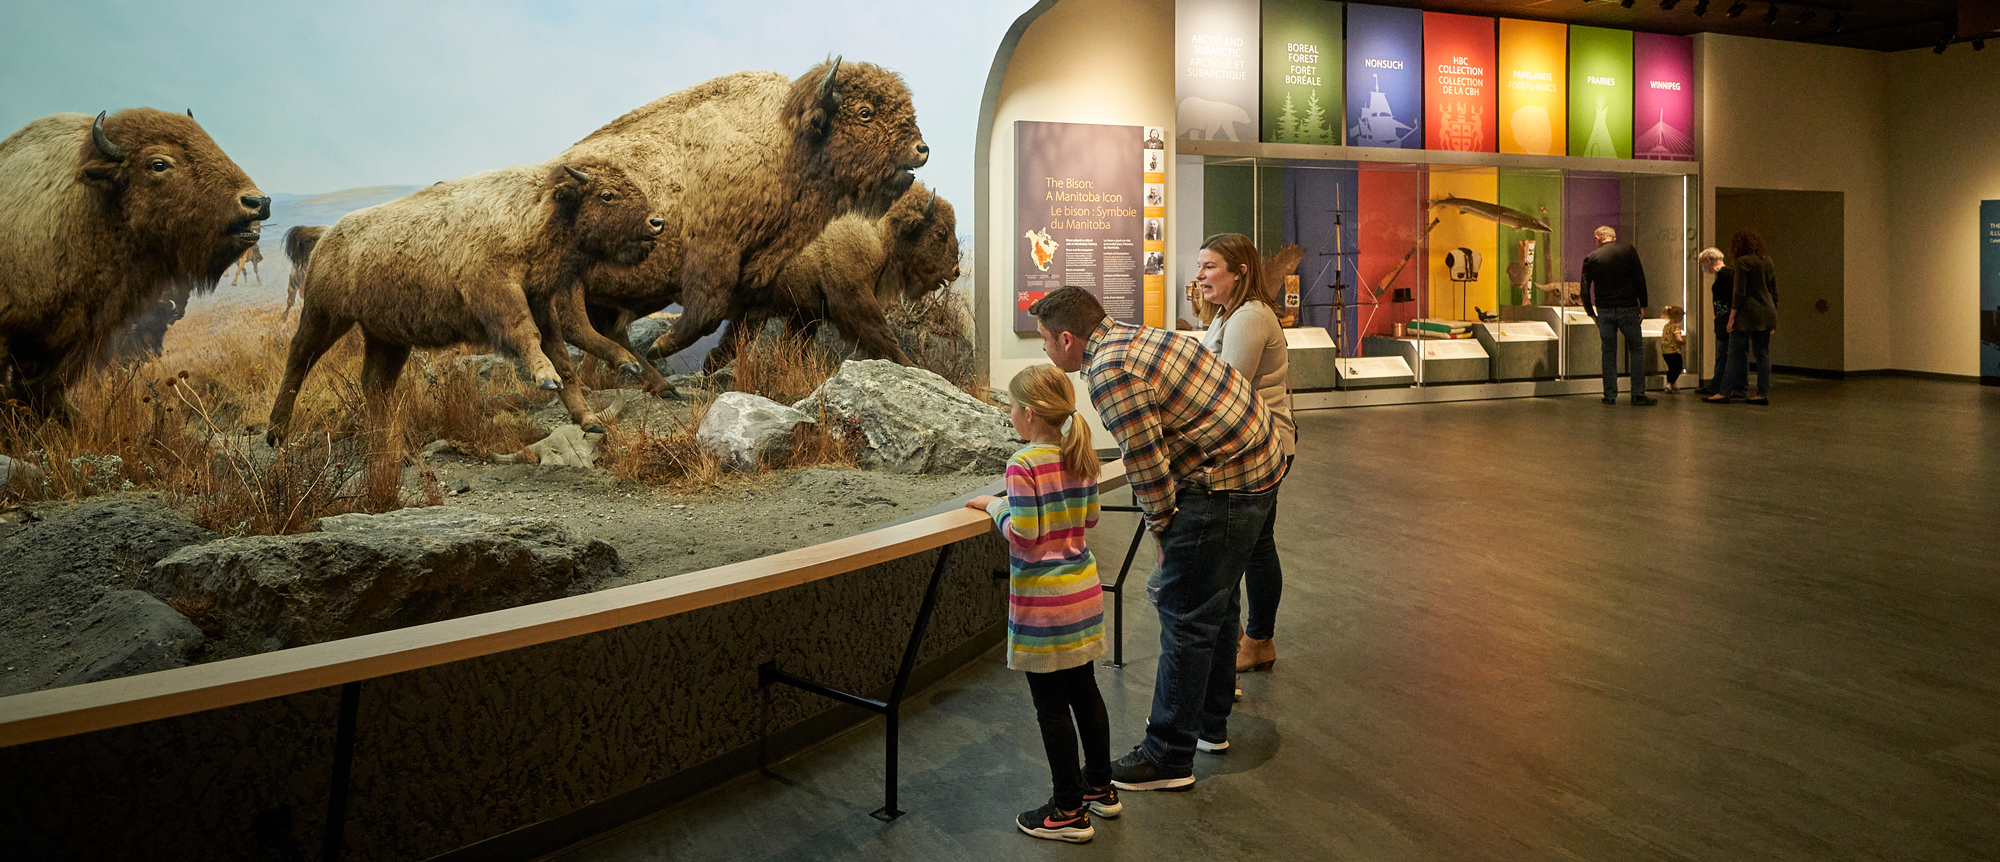 A family, two adults and a child, stand at the railing of a diorama of four stampeding bison and, in the background, three adults and a small child looking at a series of colourful banners and cases full of artifacts and specimens introducing the main galleries.